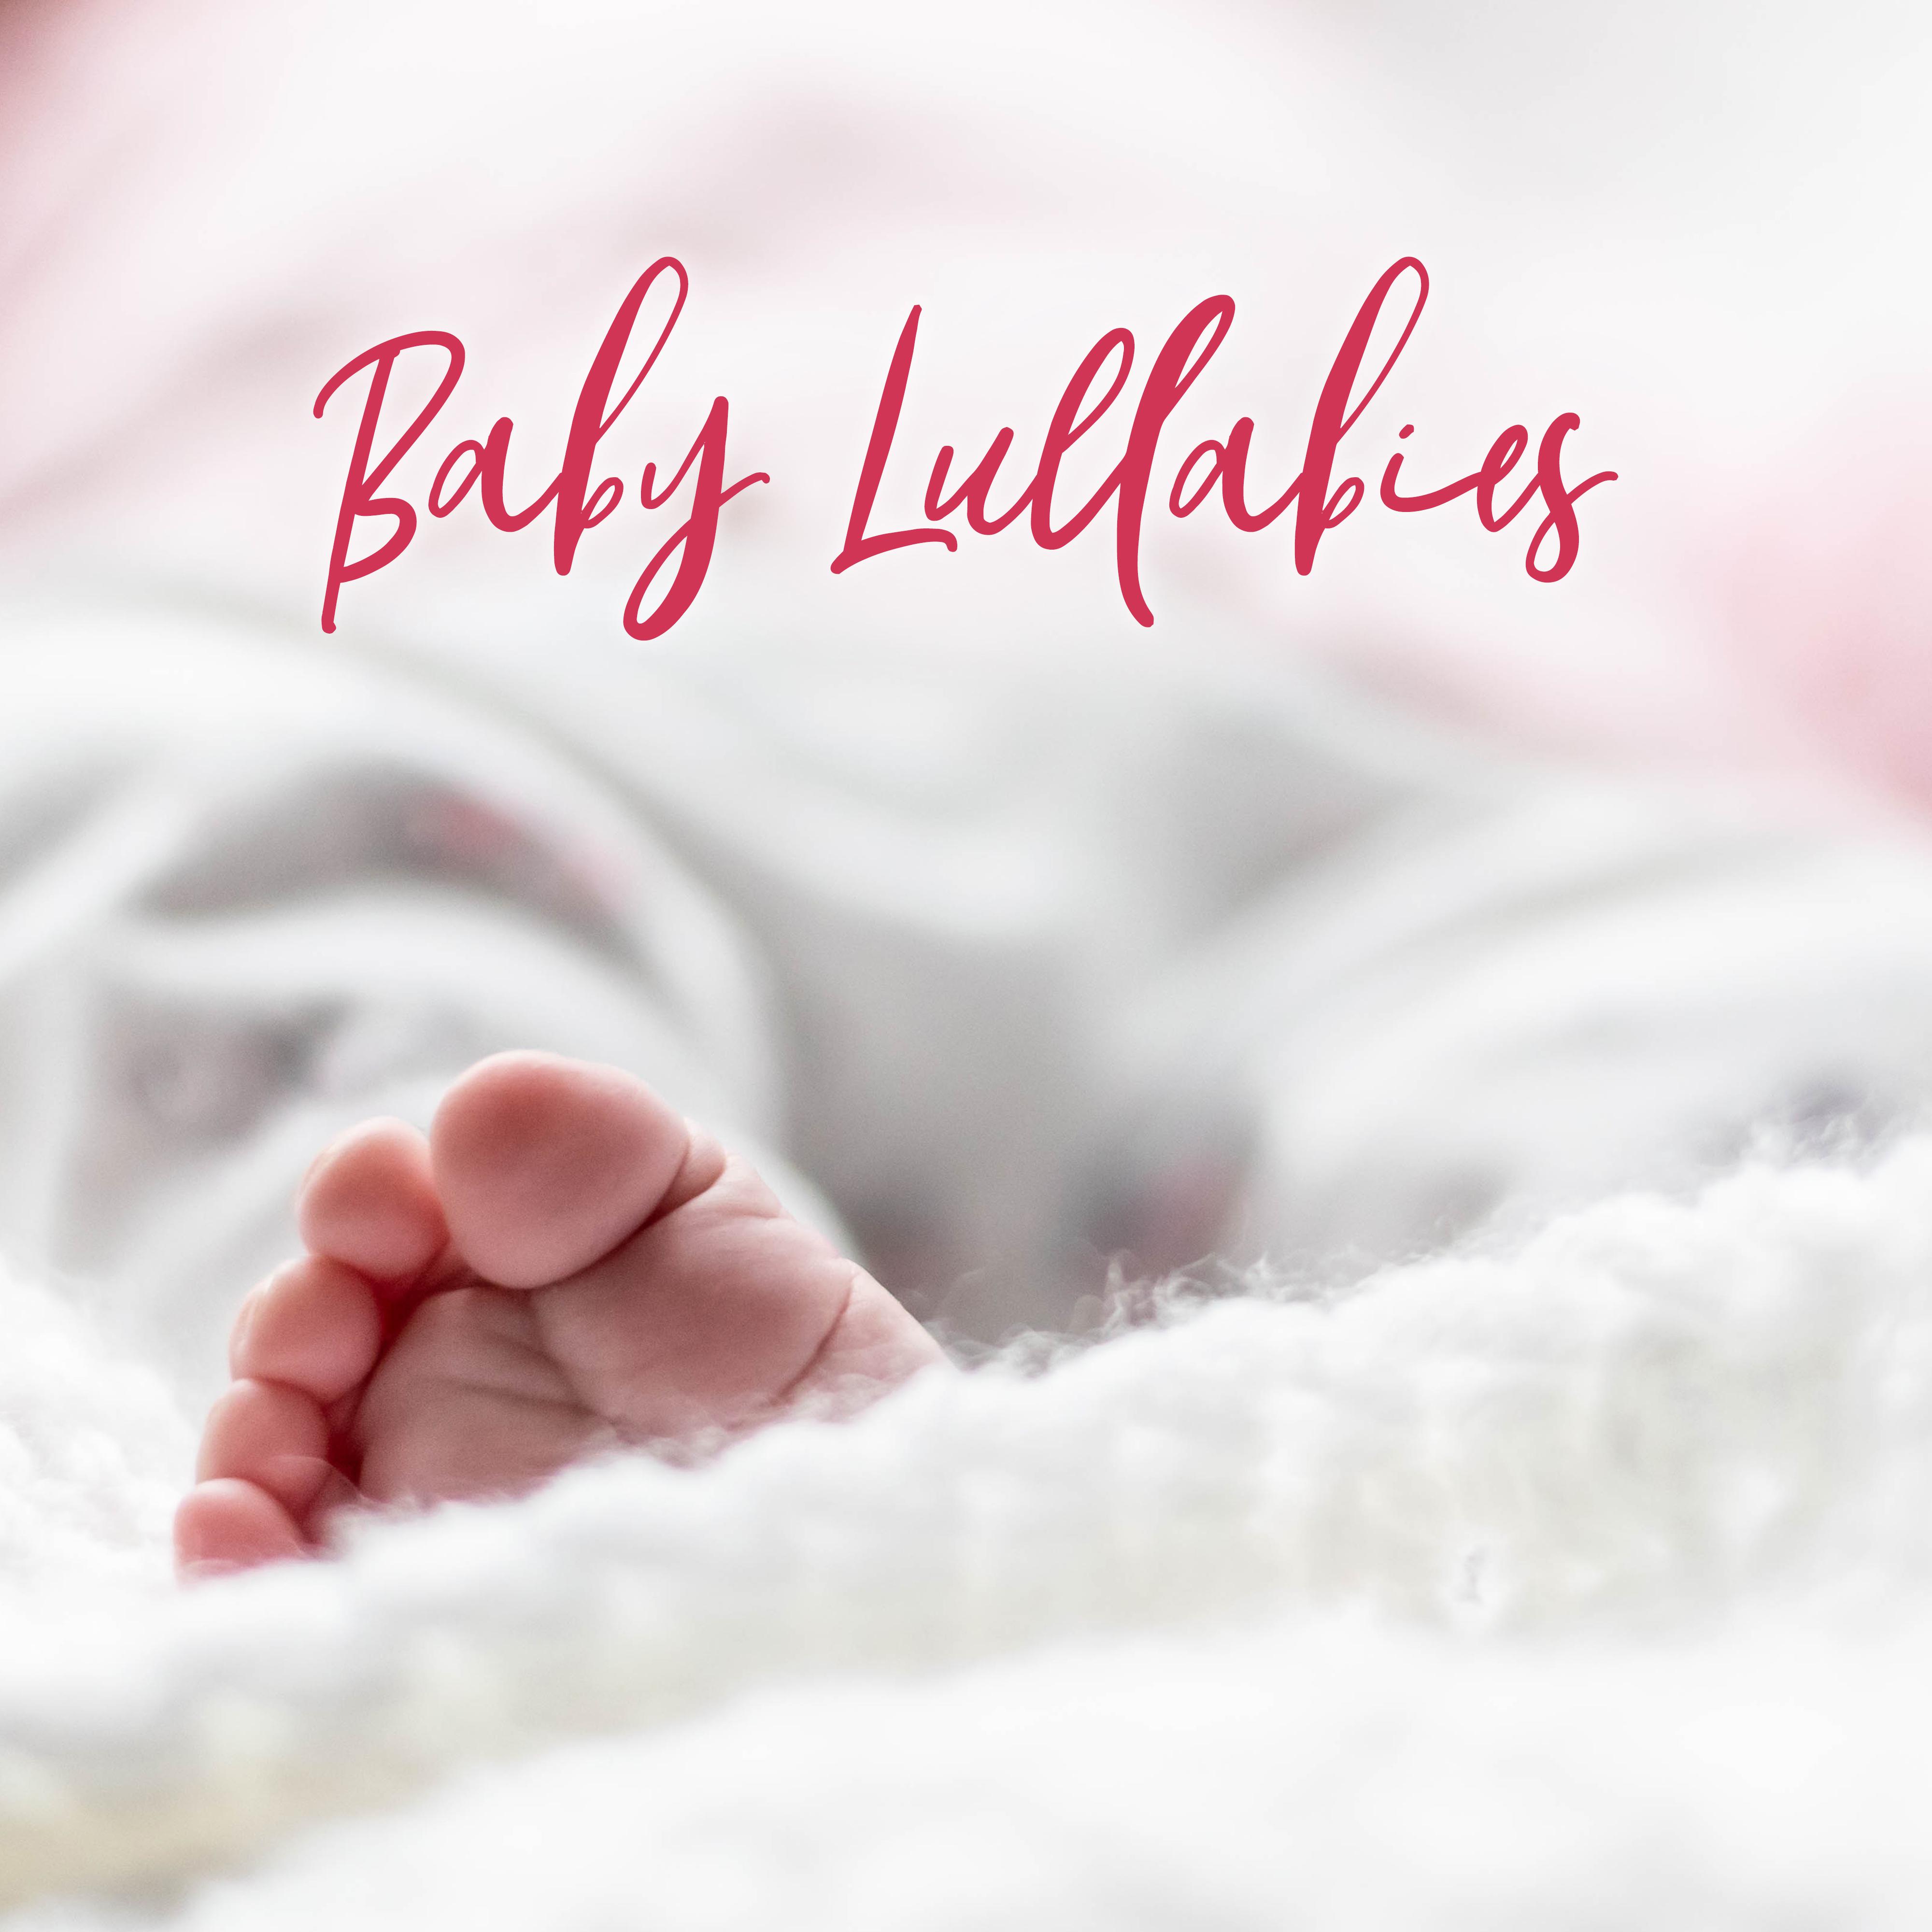 Baby Lullabies – Relaxing Sounds for Baby, Peaceful Sleep, Calming Lullabies, Night Melodies, Soothing Nature Sounds for Kids